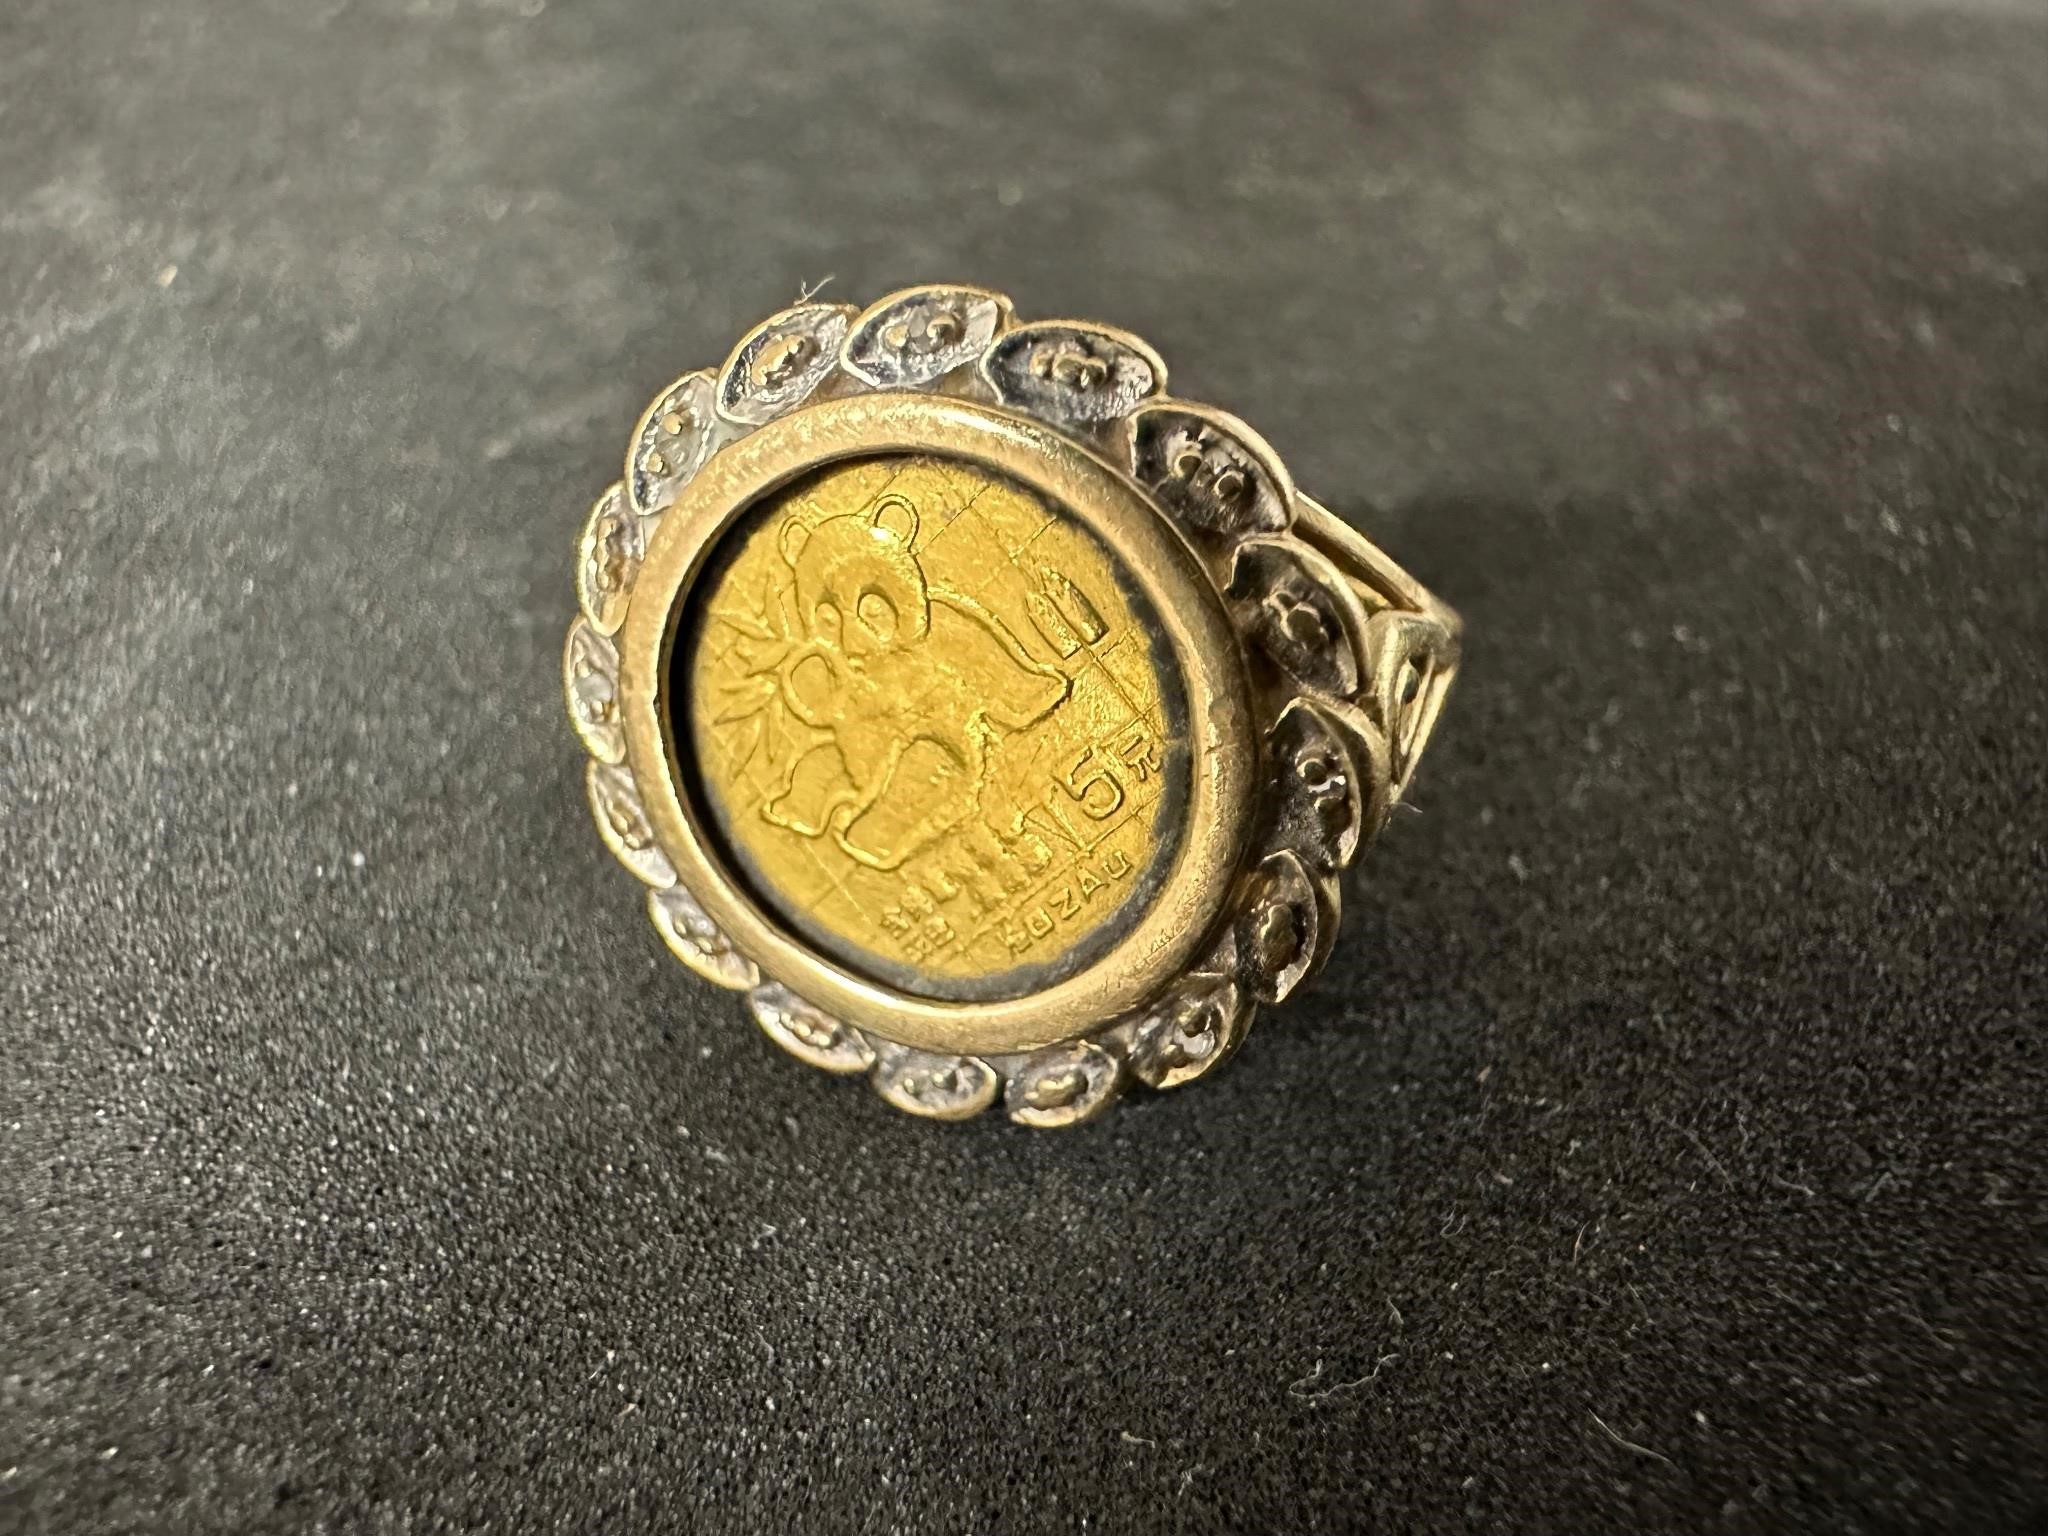 1/20 oz gold coin on ring